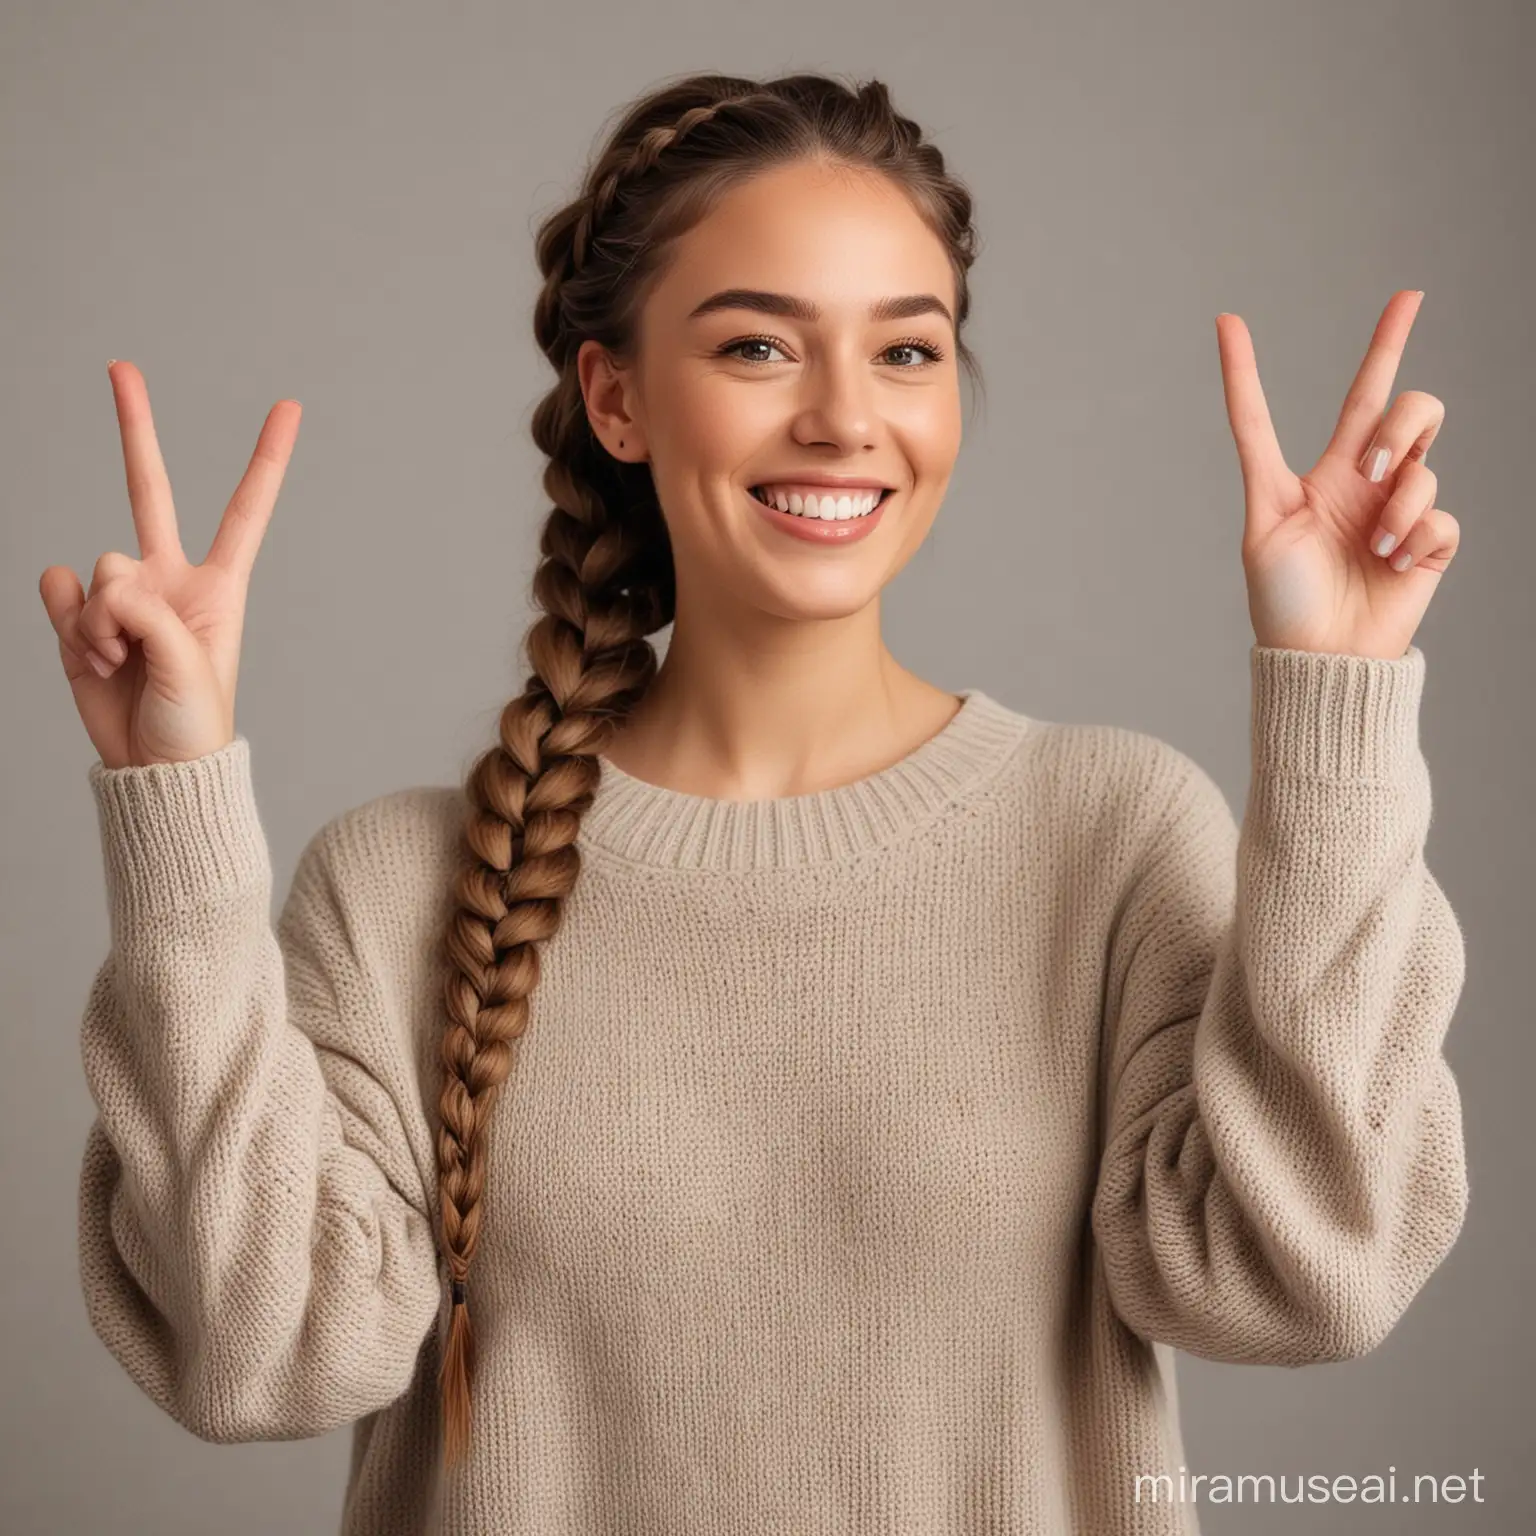 a woman with nice braids, wearing a sweater and smiling while pointing her hands up to show directions for two different options